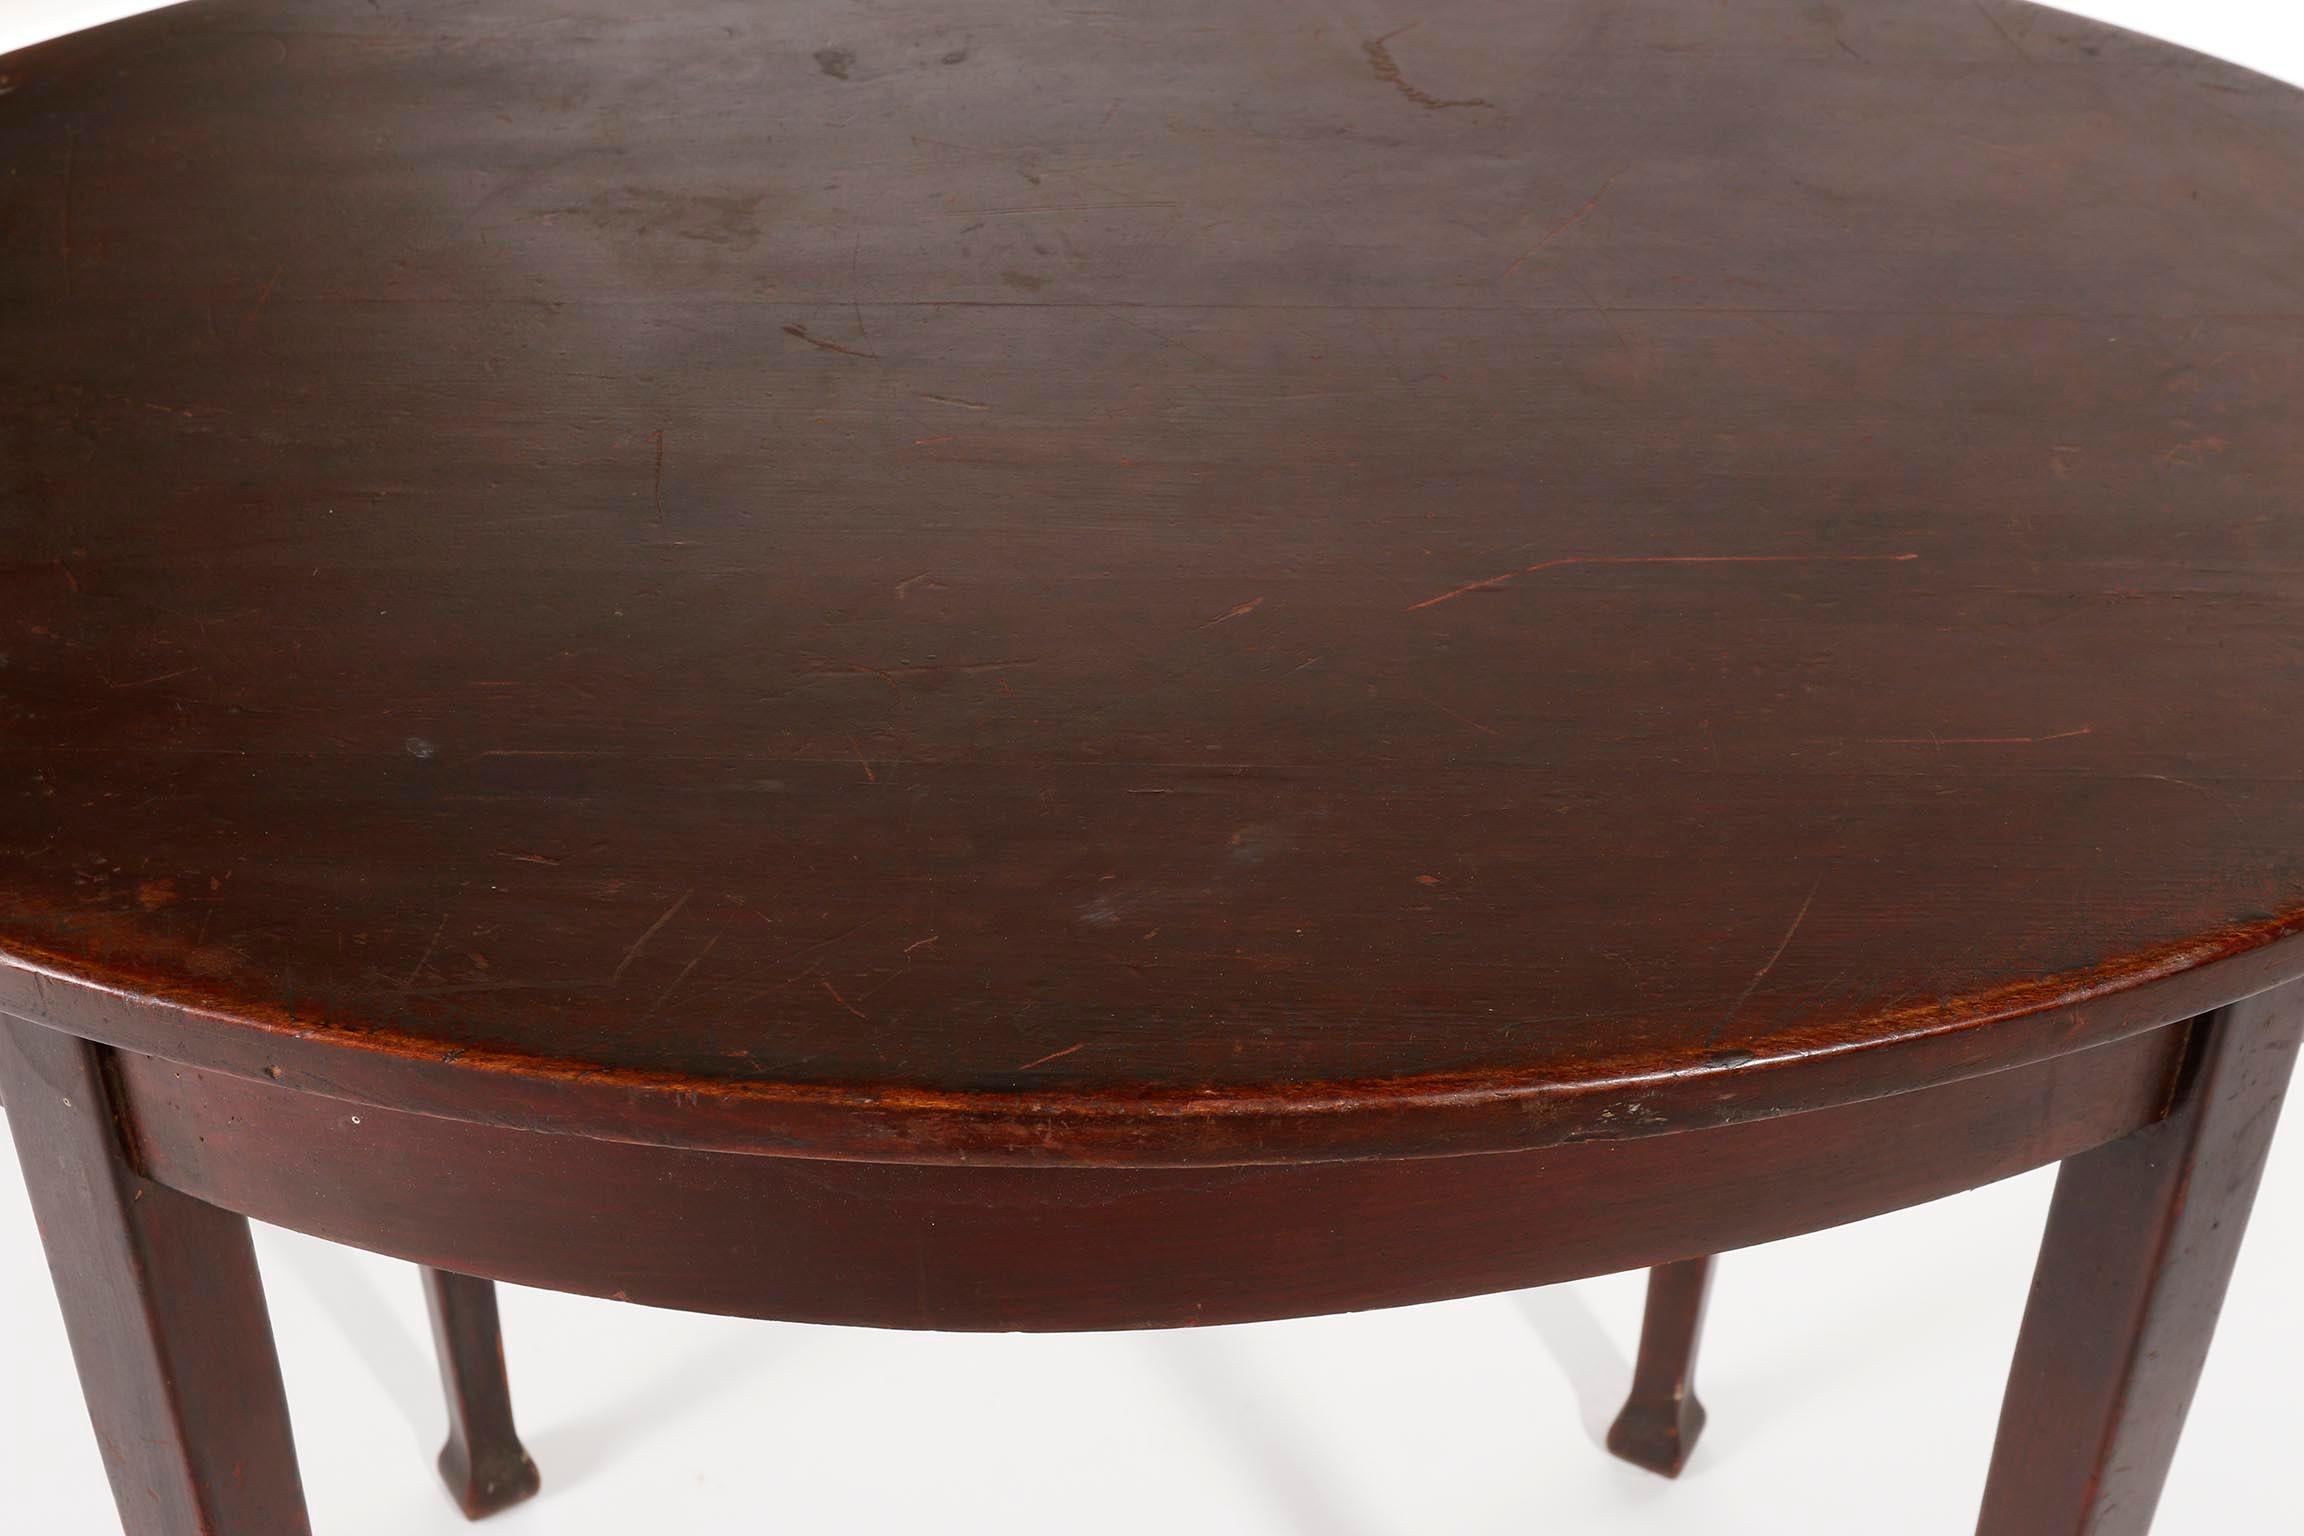 Early 20th Century Marcel Kammerer Oval Mahogany Table Thonet Art Nouveau, Vienna, Austria, 1910